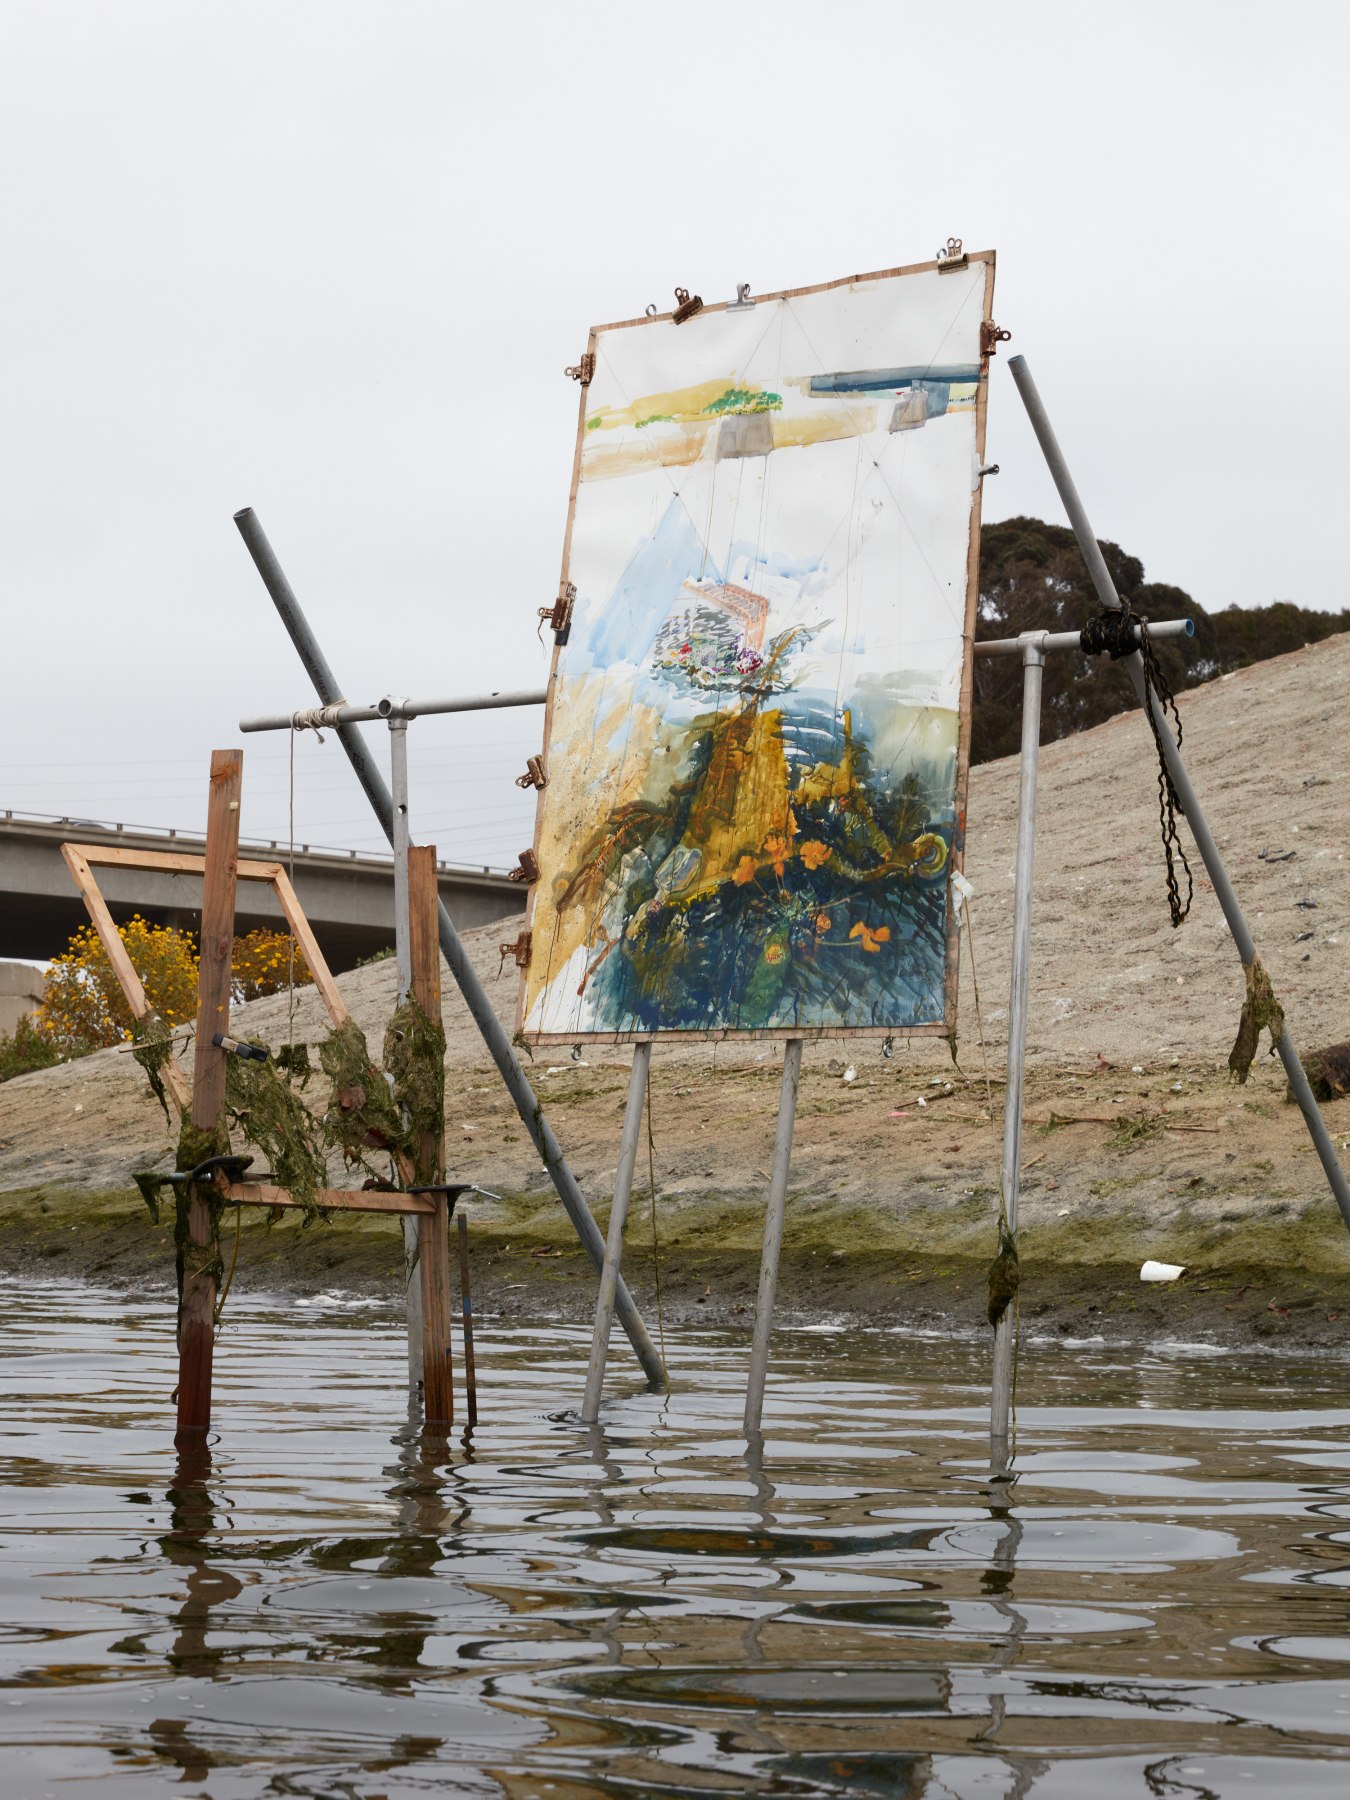 An easel made of metal poles and wood anchored in the Ballona Creek holds Sterling Wells' "Shopping Carts and Poppies" in progress. 